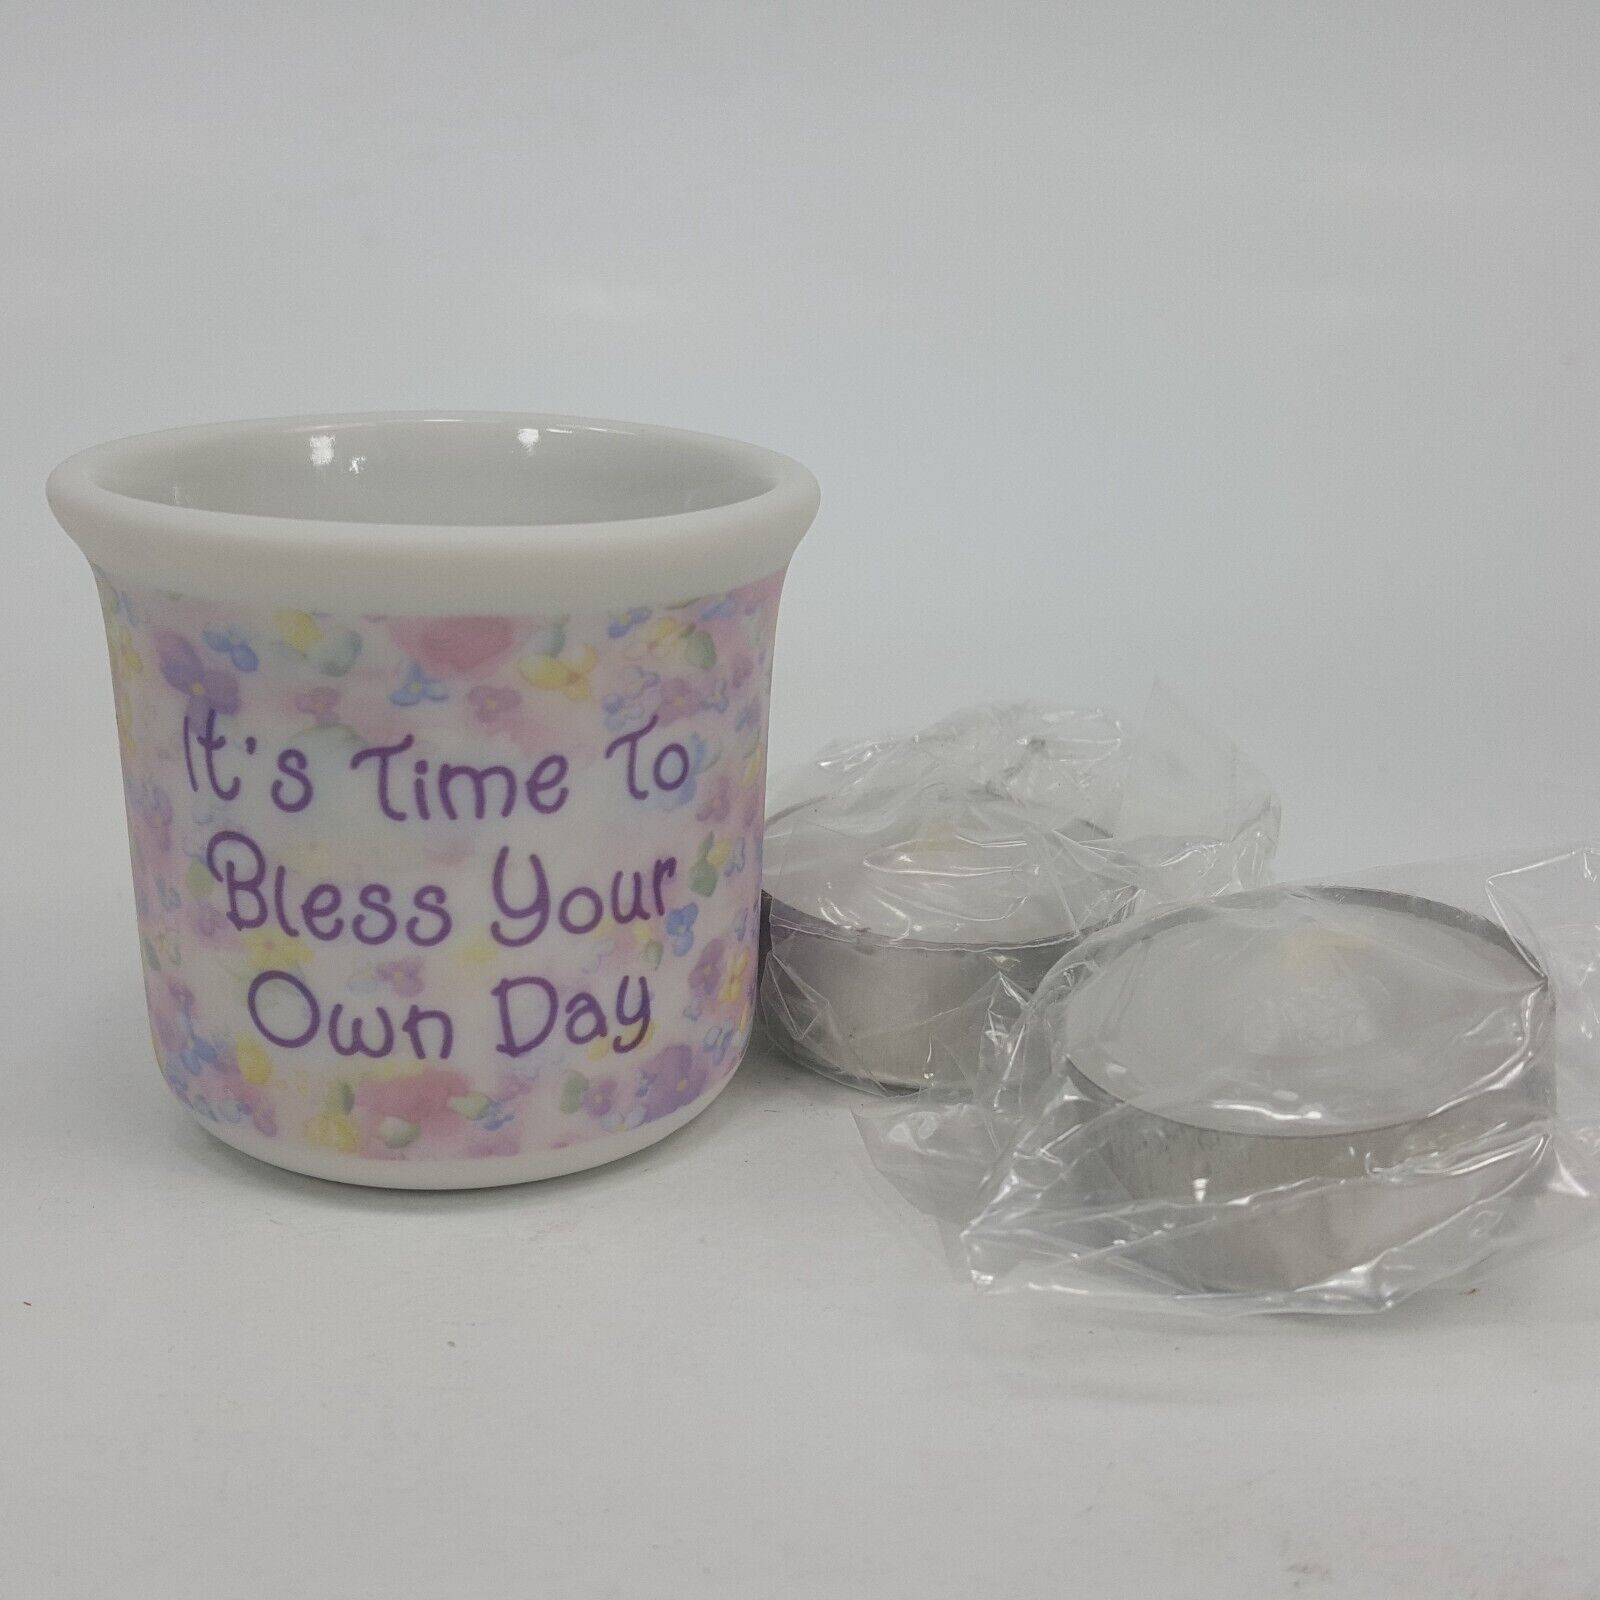 Enesco Precious Moments Its Time to Bless Your Own Day Votive Candleholder LFHKN - $5.00